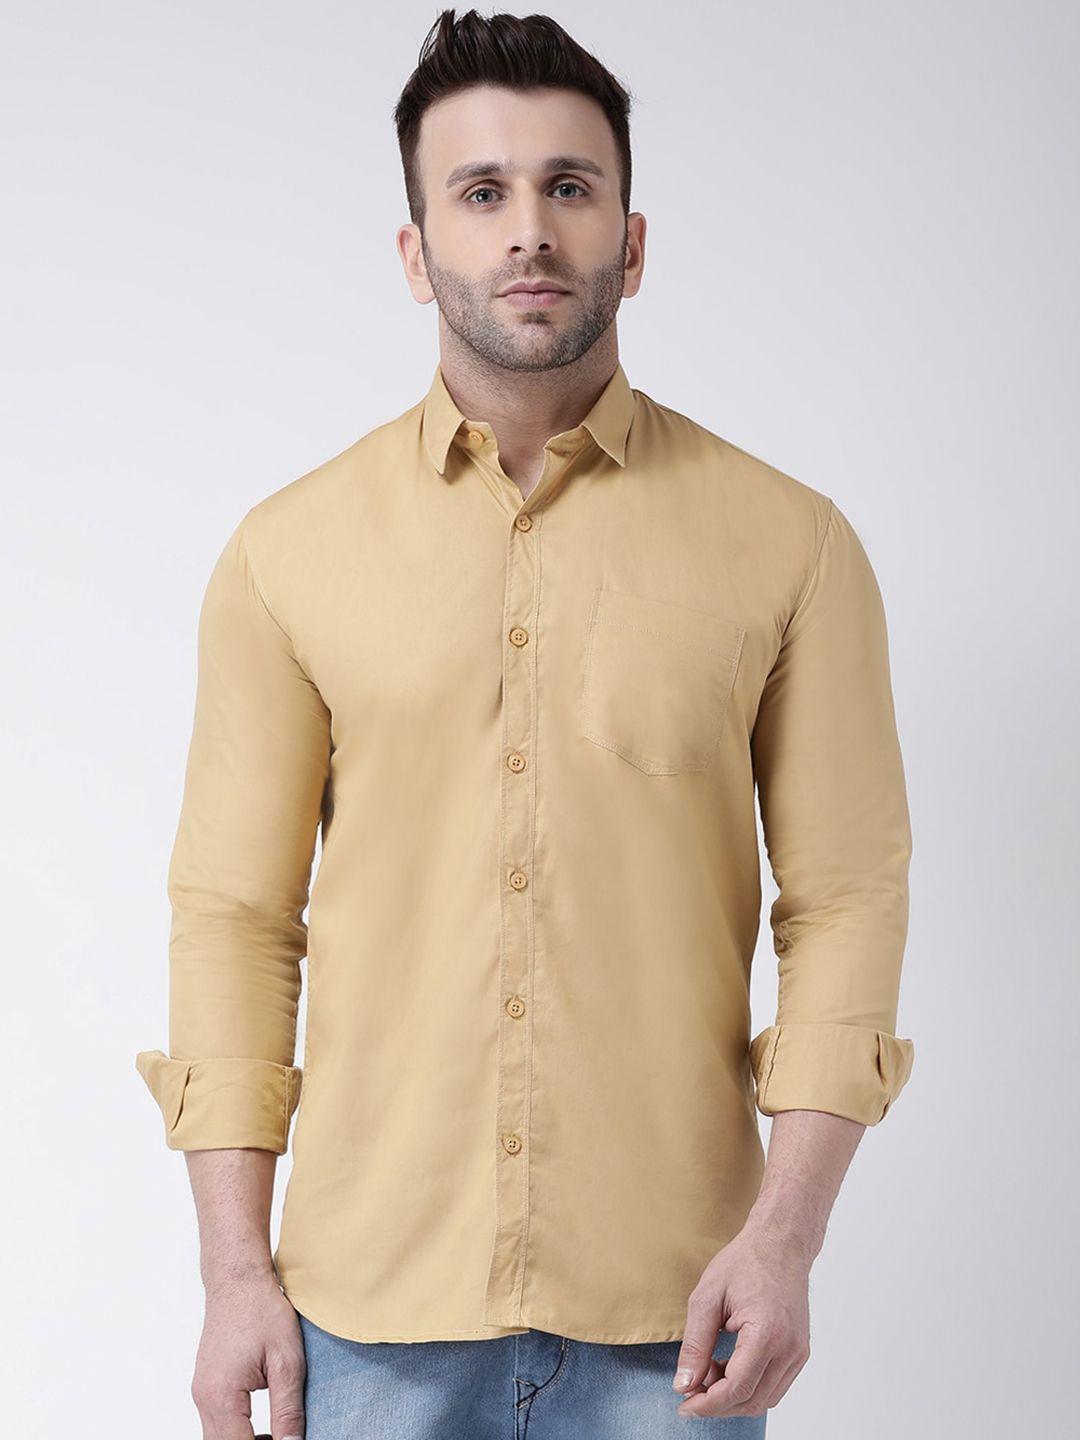 hangup-trend-slim-fit-casual-pure-cotton-shirt